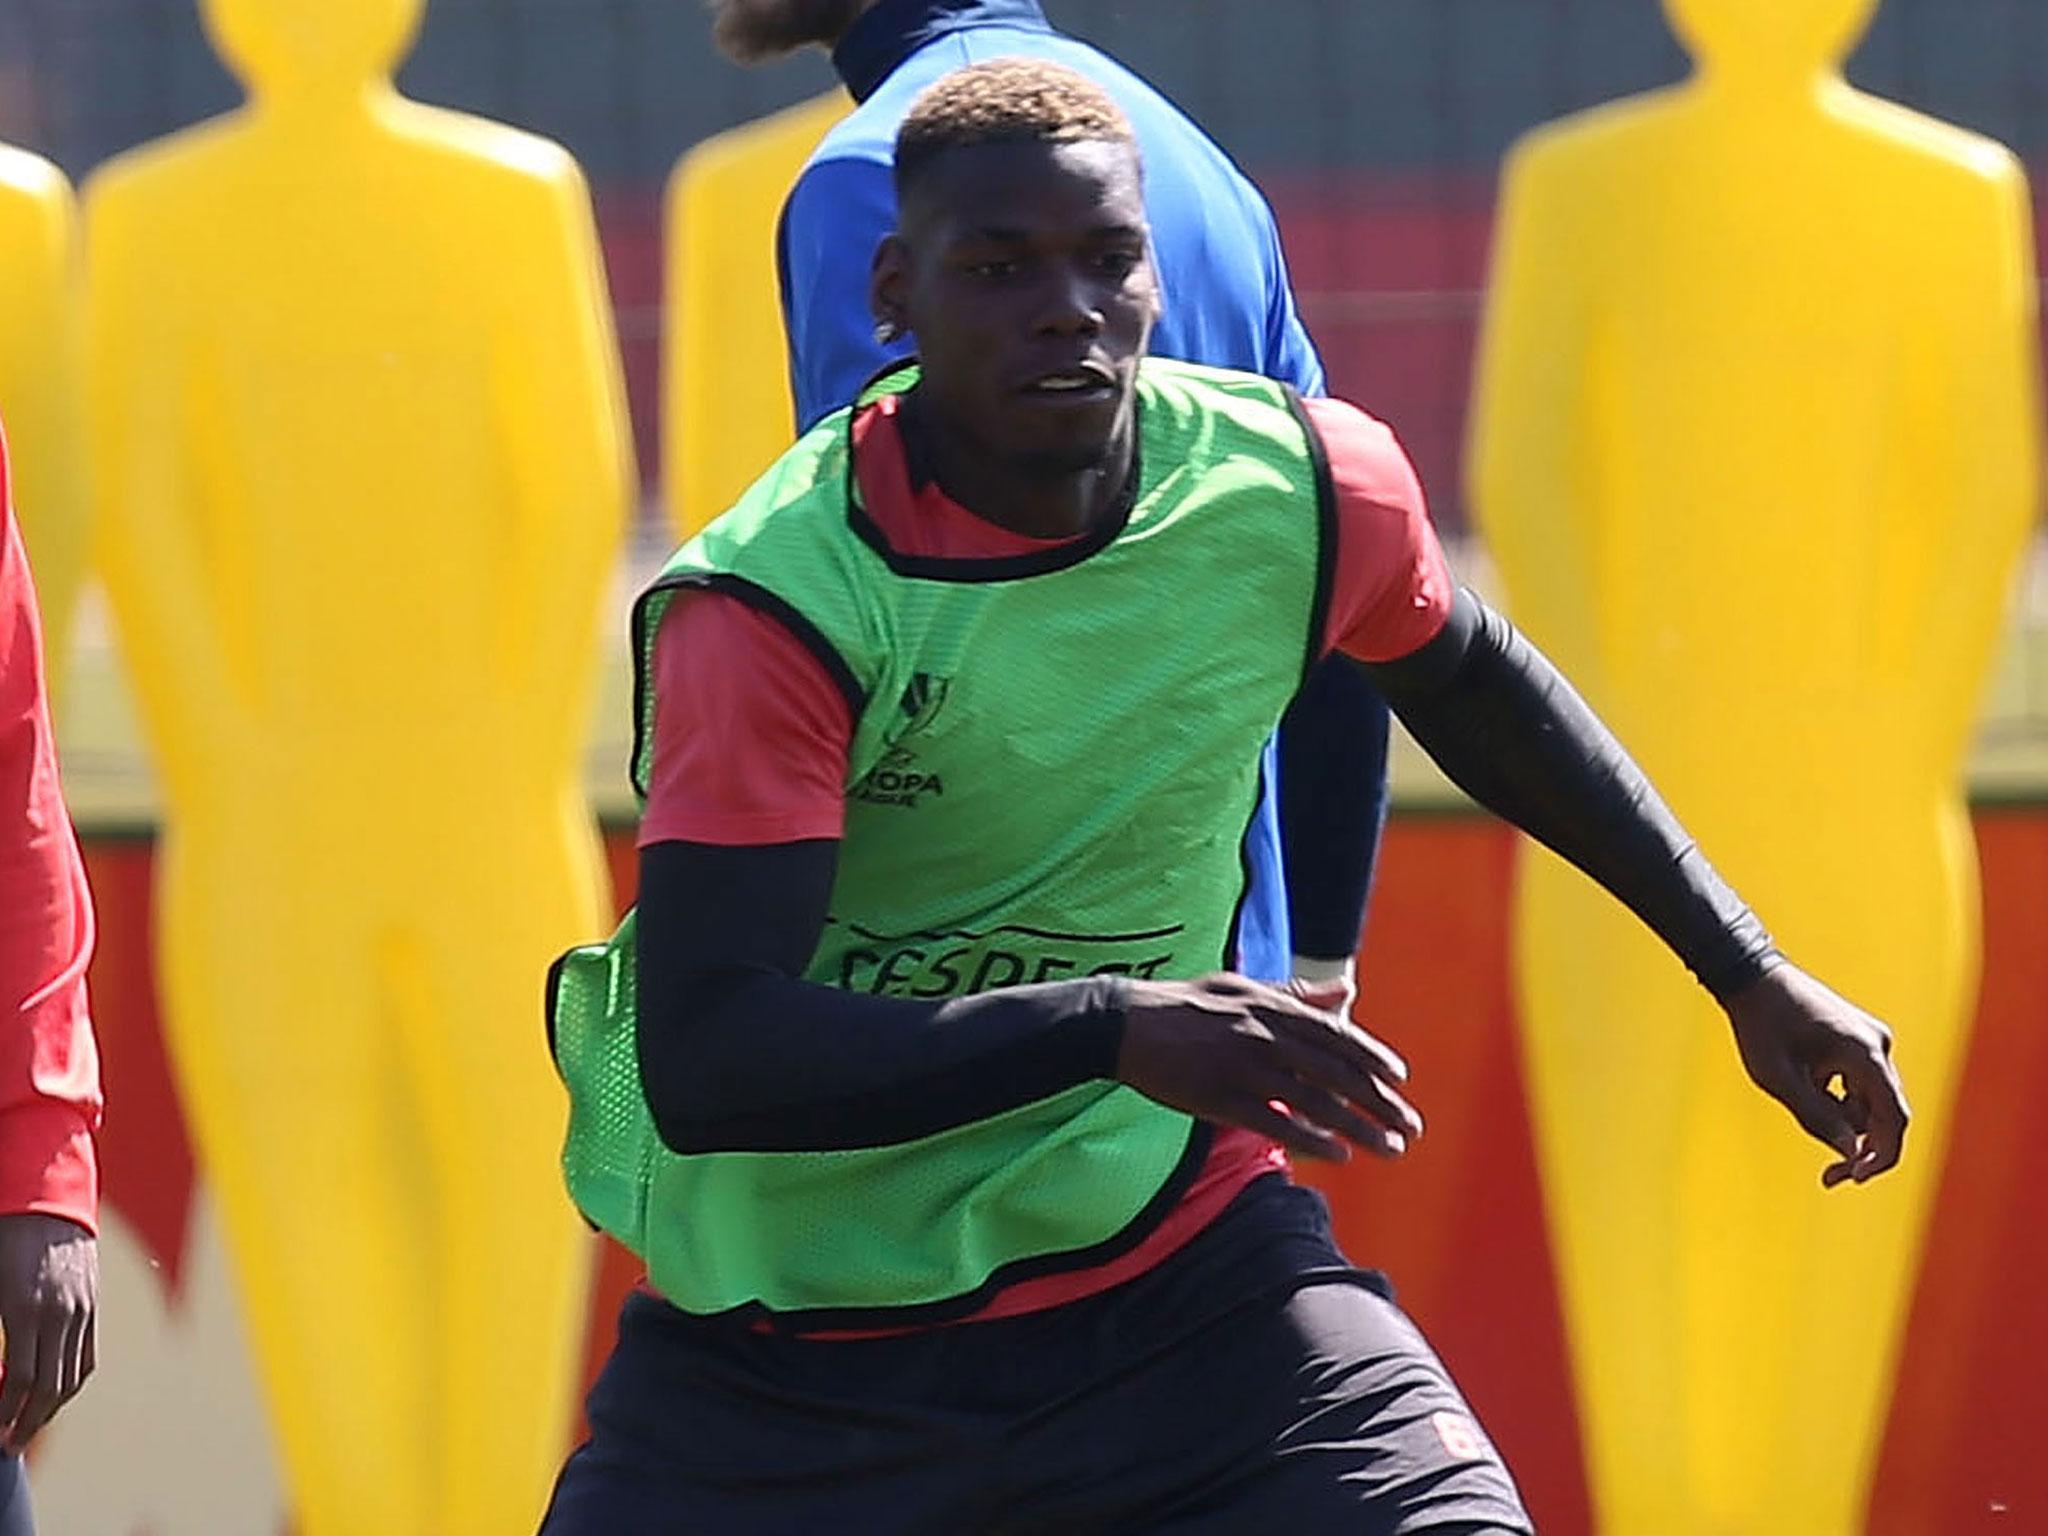 Paul Pogba is fully focused on Manchester United's game with Celta Vigo